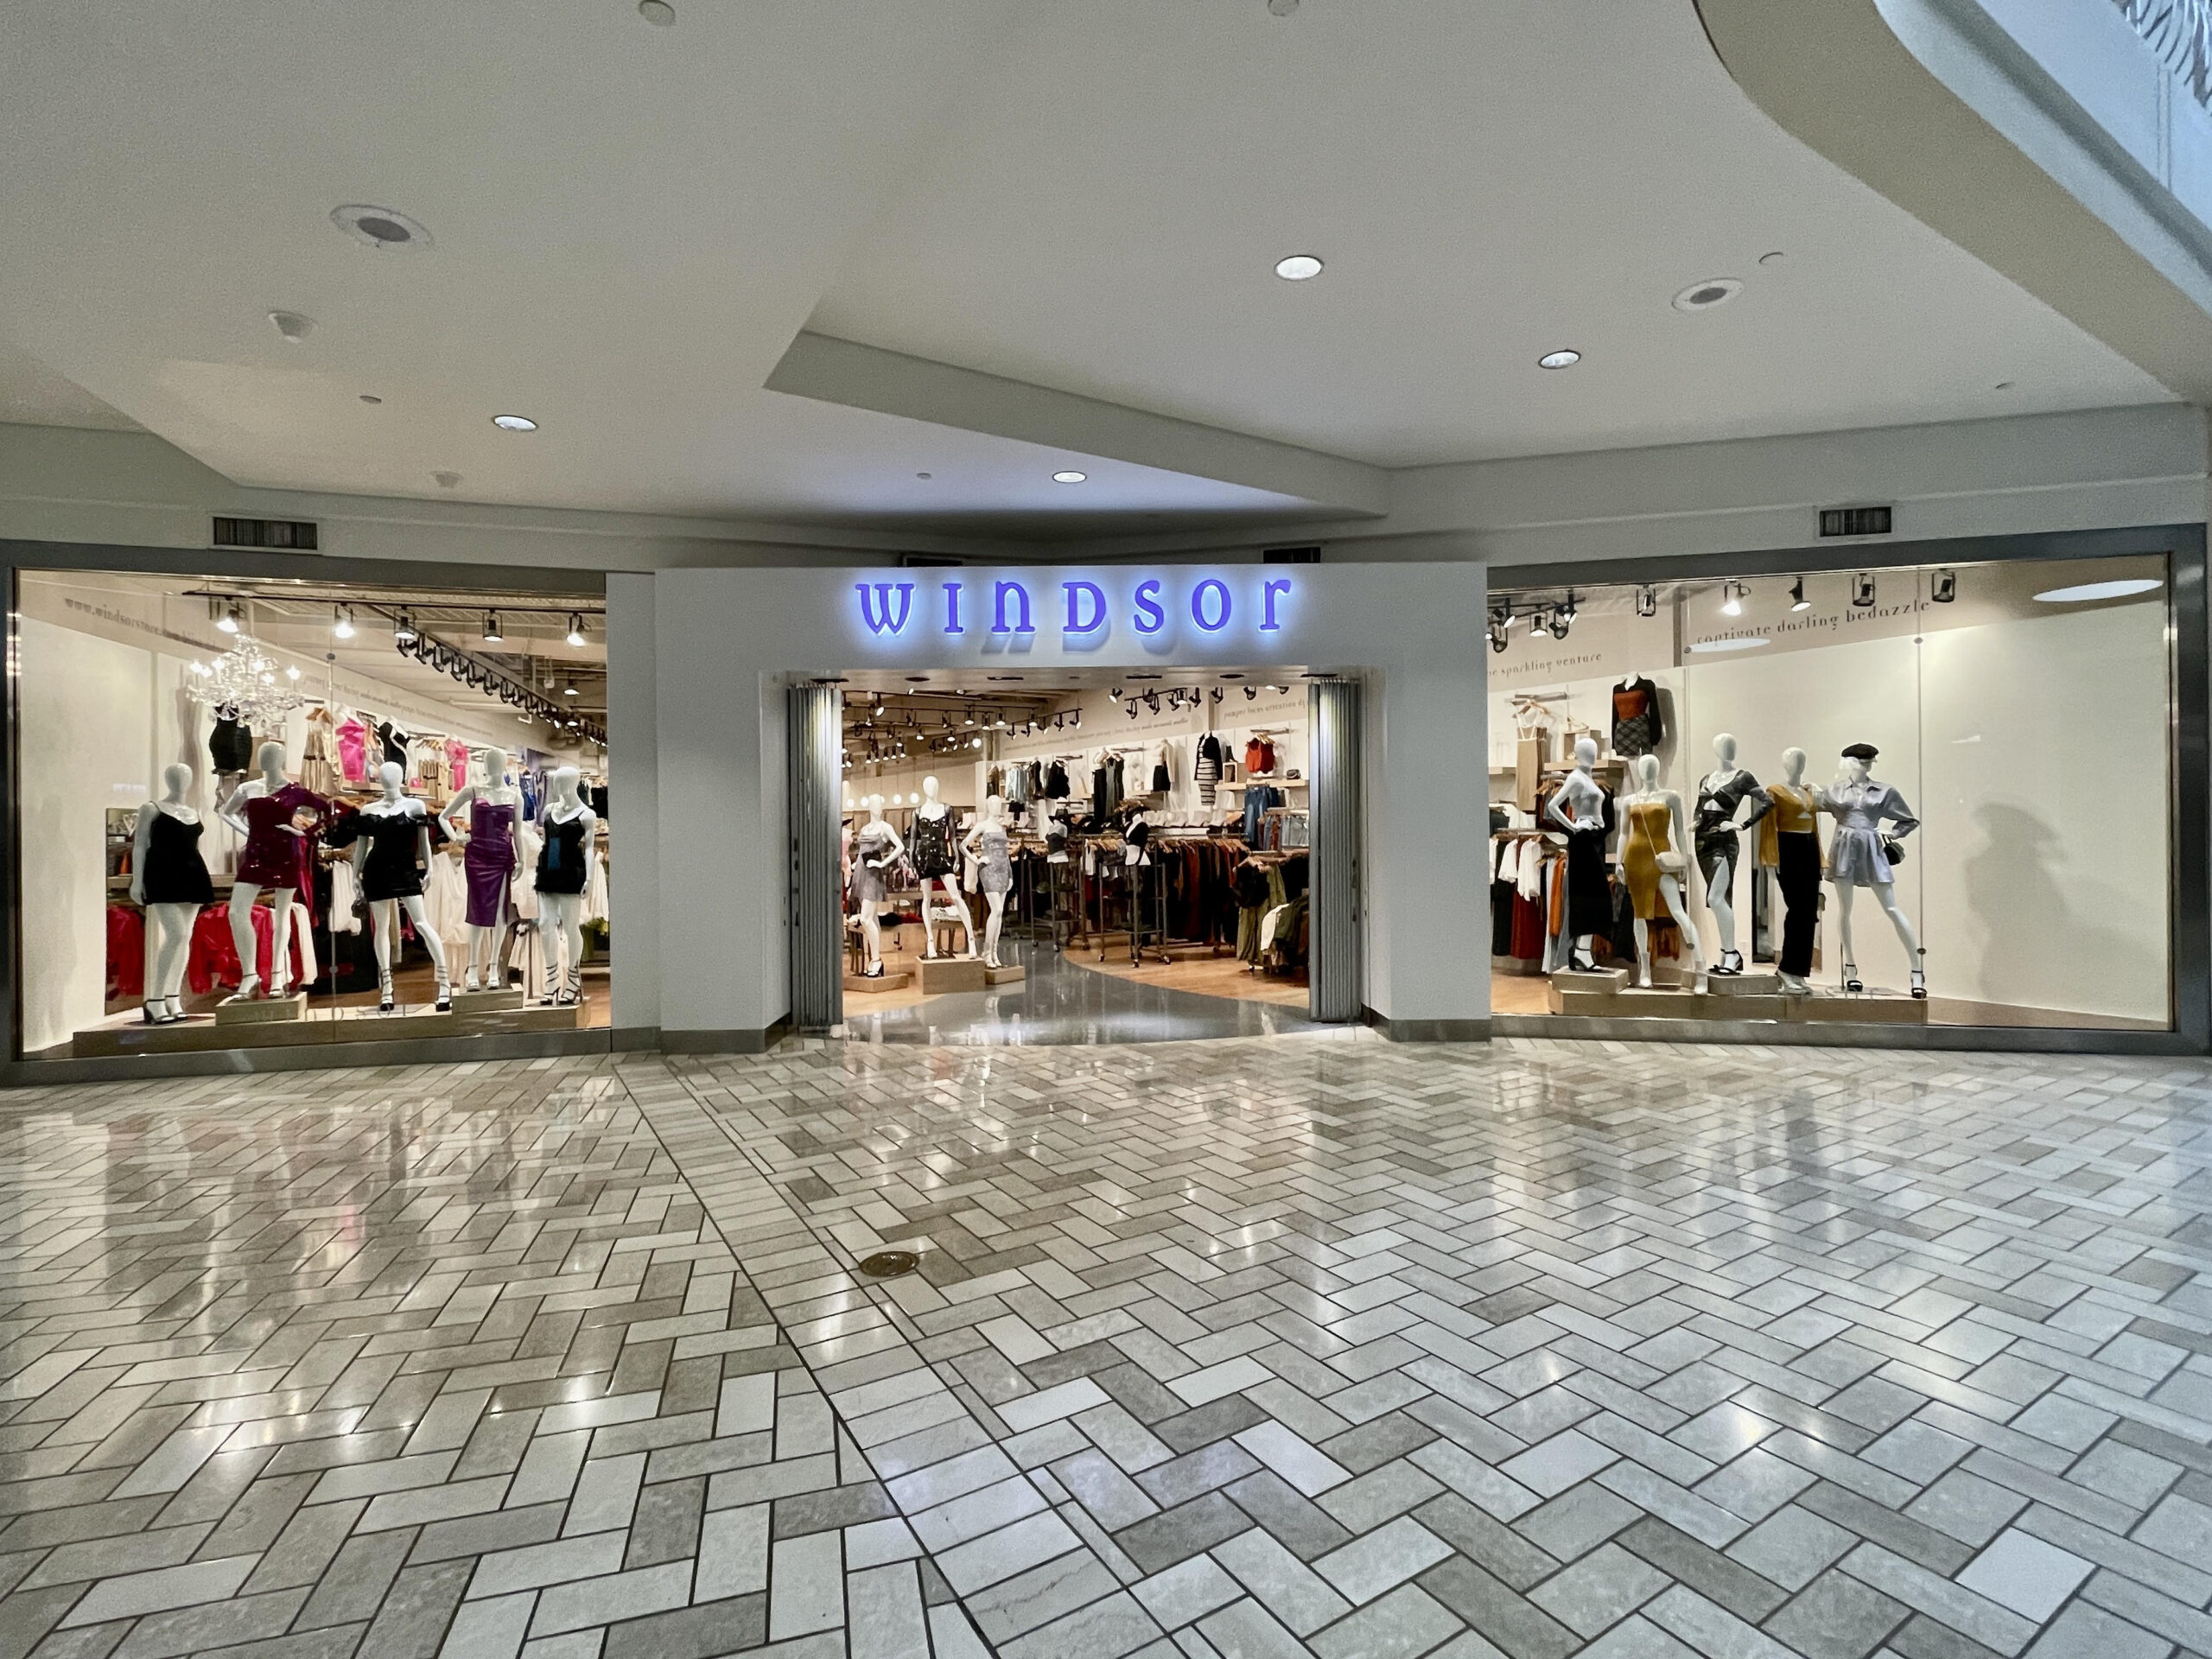 Tysons Retail Happenings and Featured Buildings